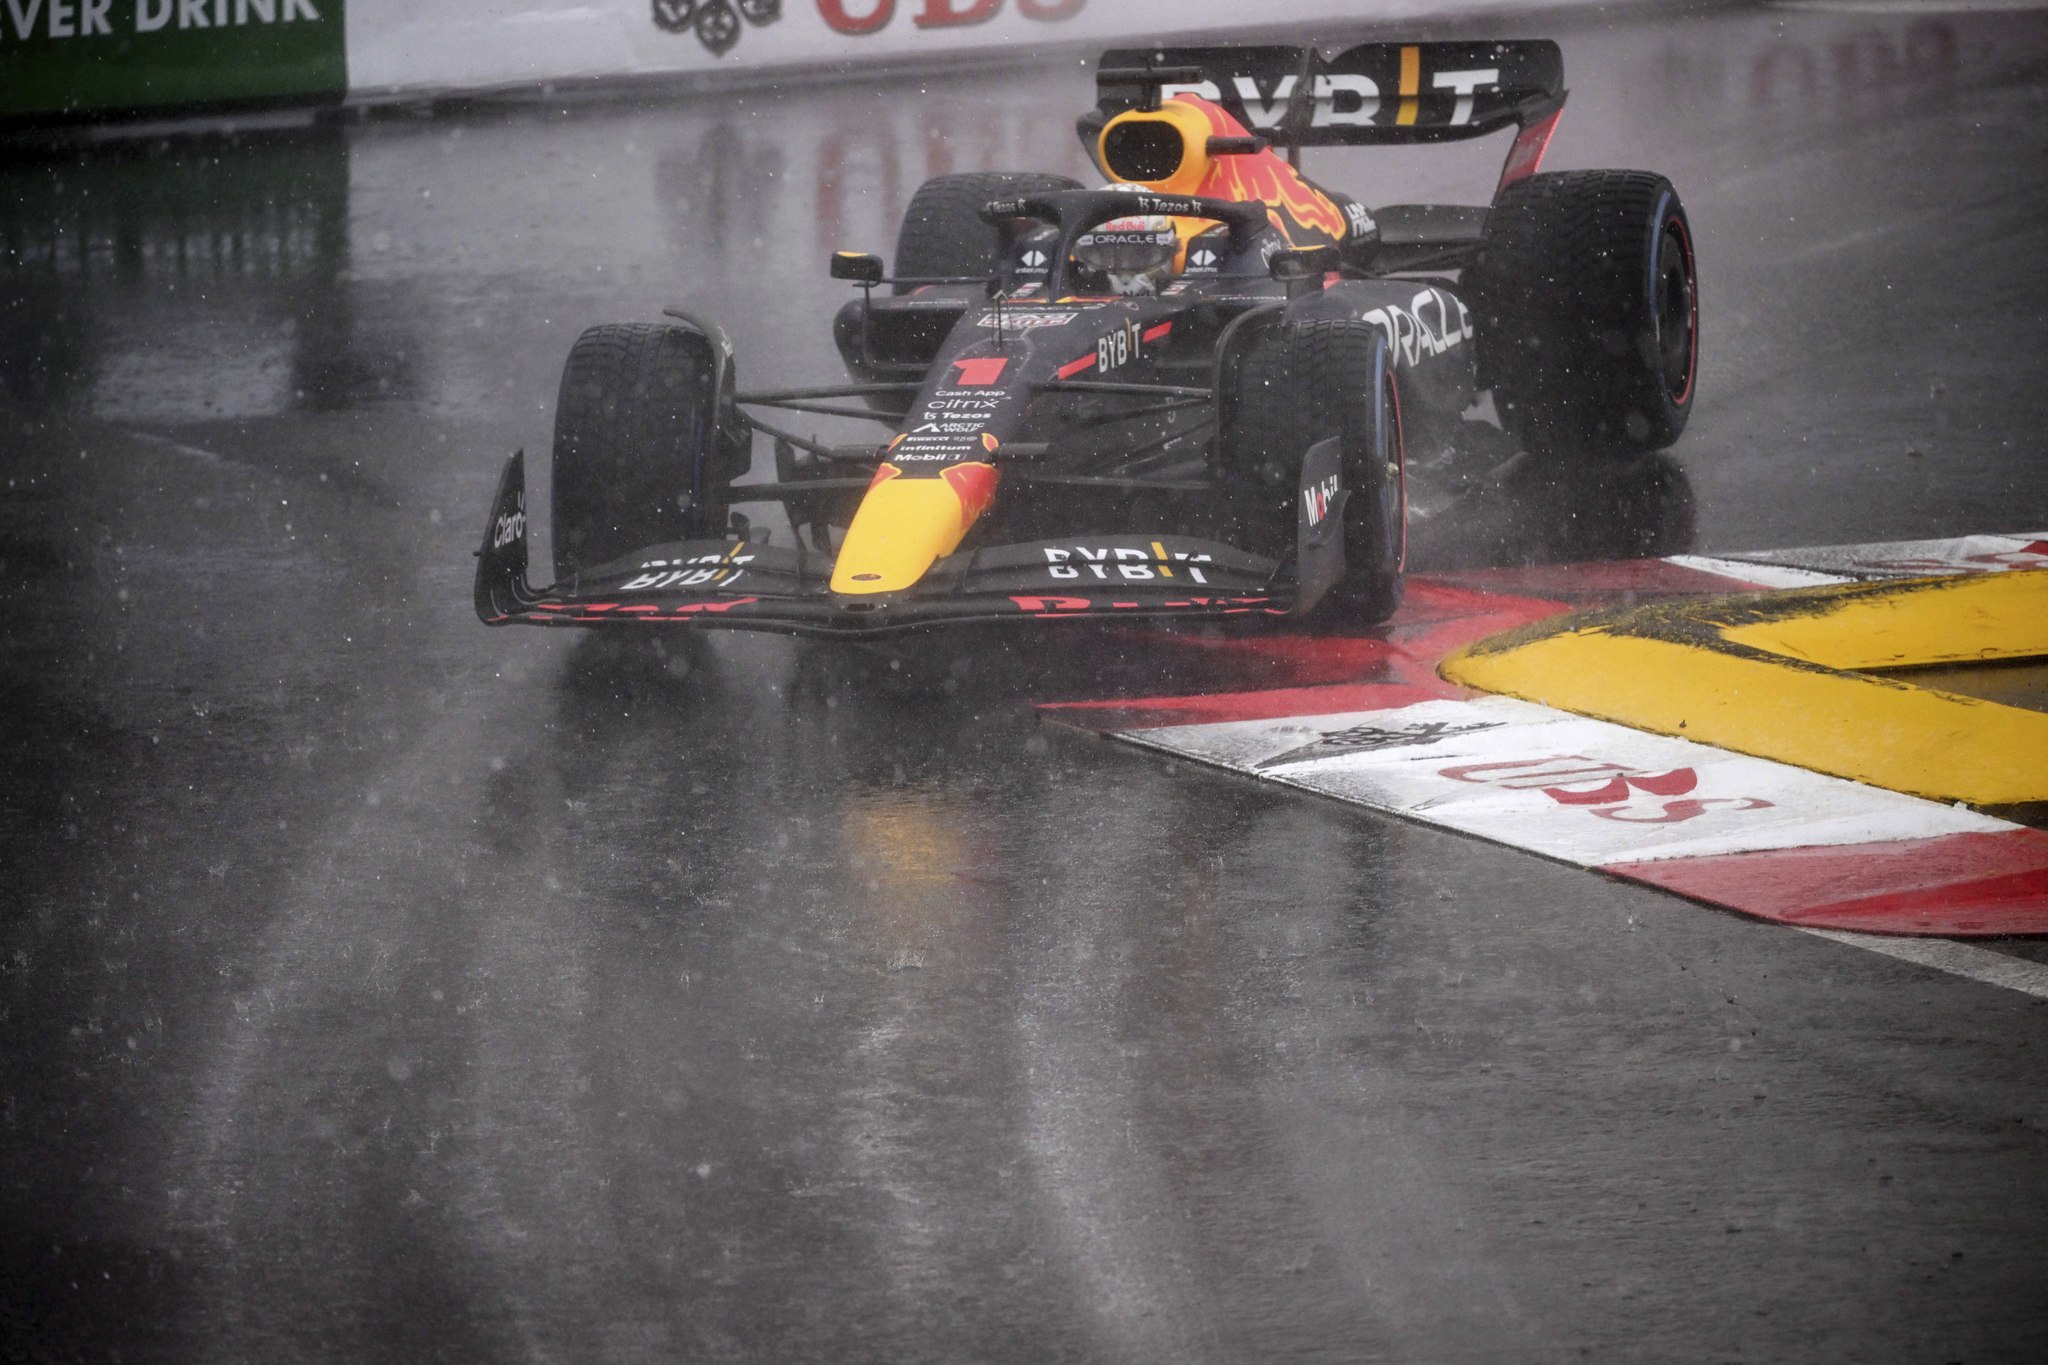 Red Bull driver Max Verstappen of the Netherlands warms up his car prior to the start of the  lt;HIT gt;Monaco lt;/HIT gt; Formula One Grand Prix, at the  lt;HIT gt;Monaco lt;/HIT gt; racetrack, in  lt;HIT gt;Monaco lt;/HIT gt;, Sunday, May 29, 2022. (Pool Photo/Christian Bruna/Via AP)